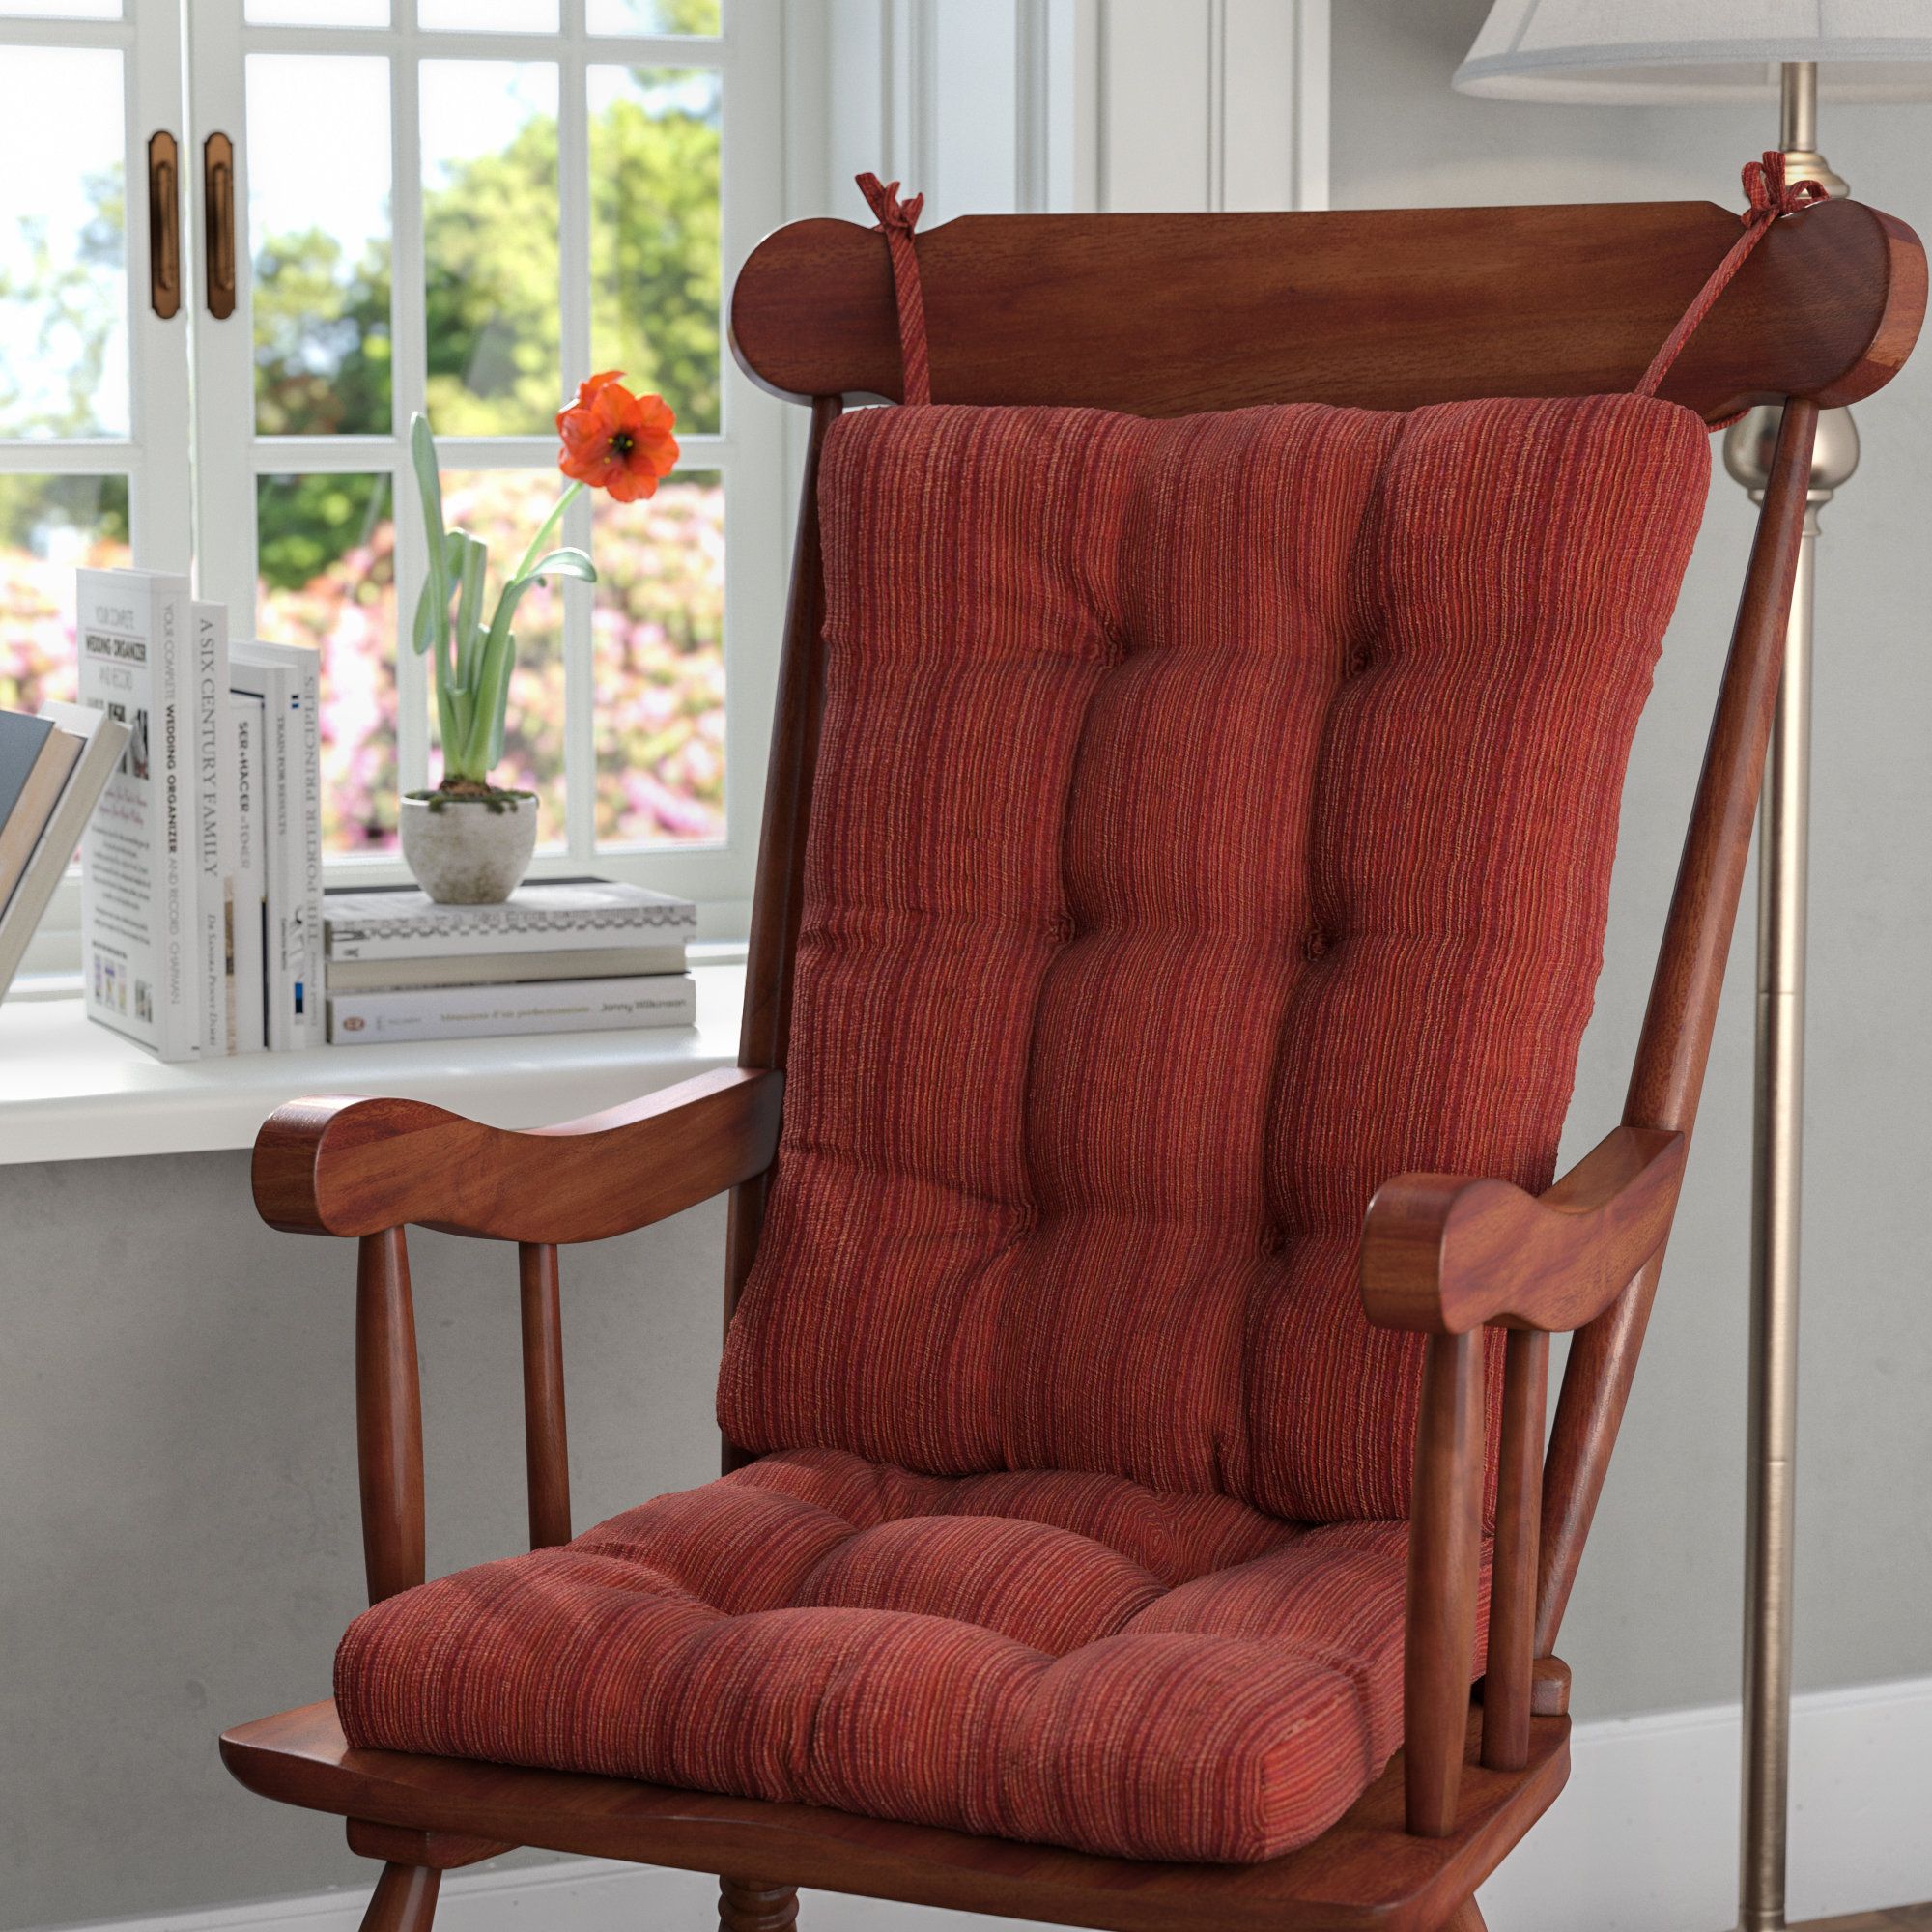 Rocker Cushions | Wayfair In Poppy Mission Espresso Rocking Chairs (View 10 of 20)